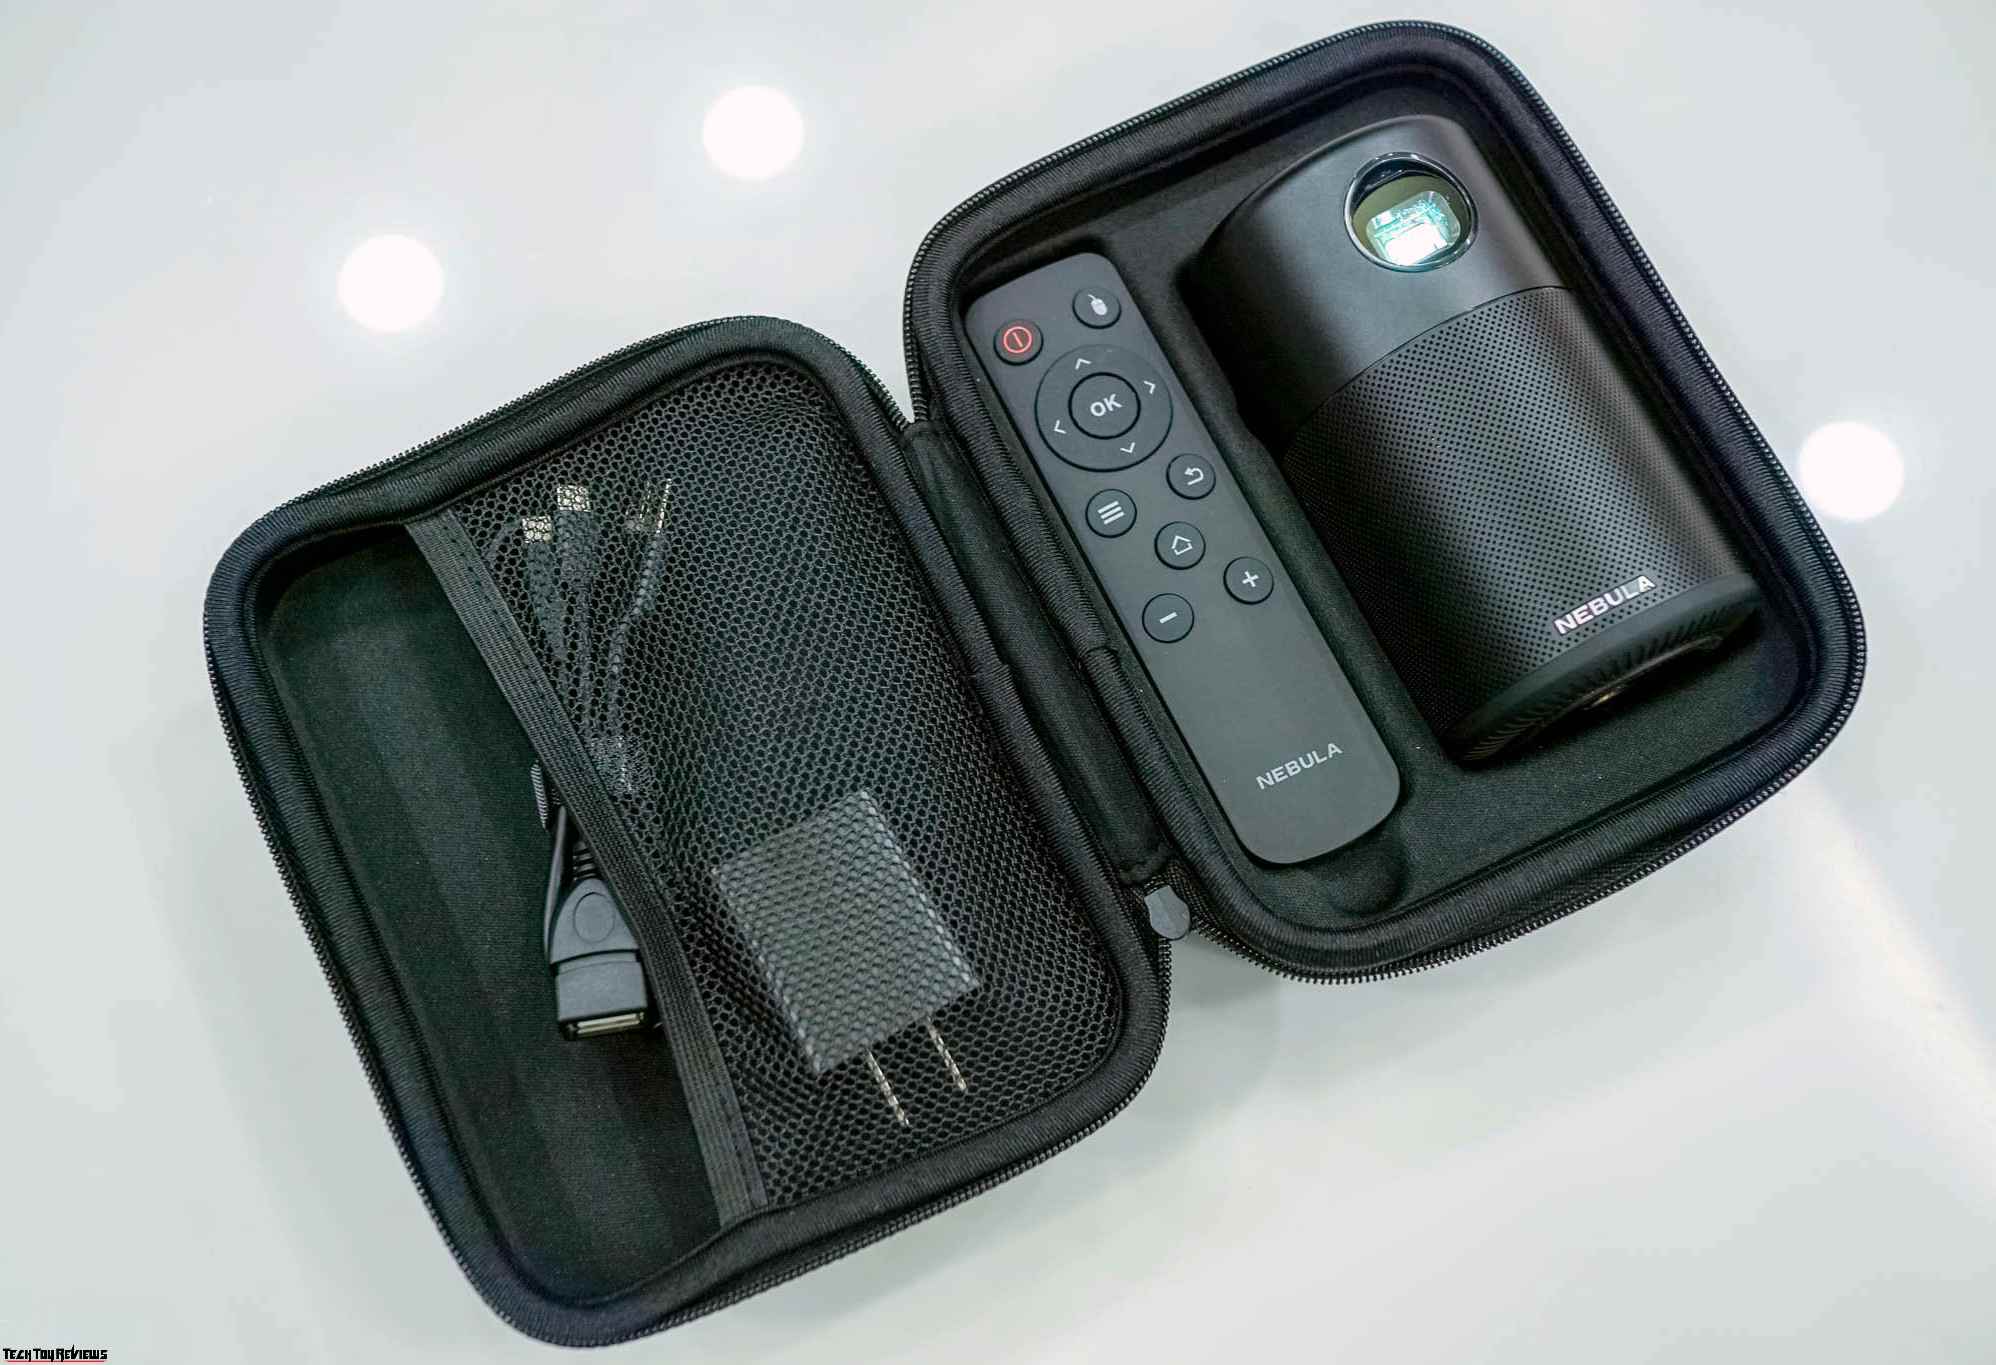 Anker Nebula Capsule unboxing | Technology News & Reviews For Smart